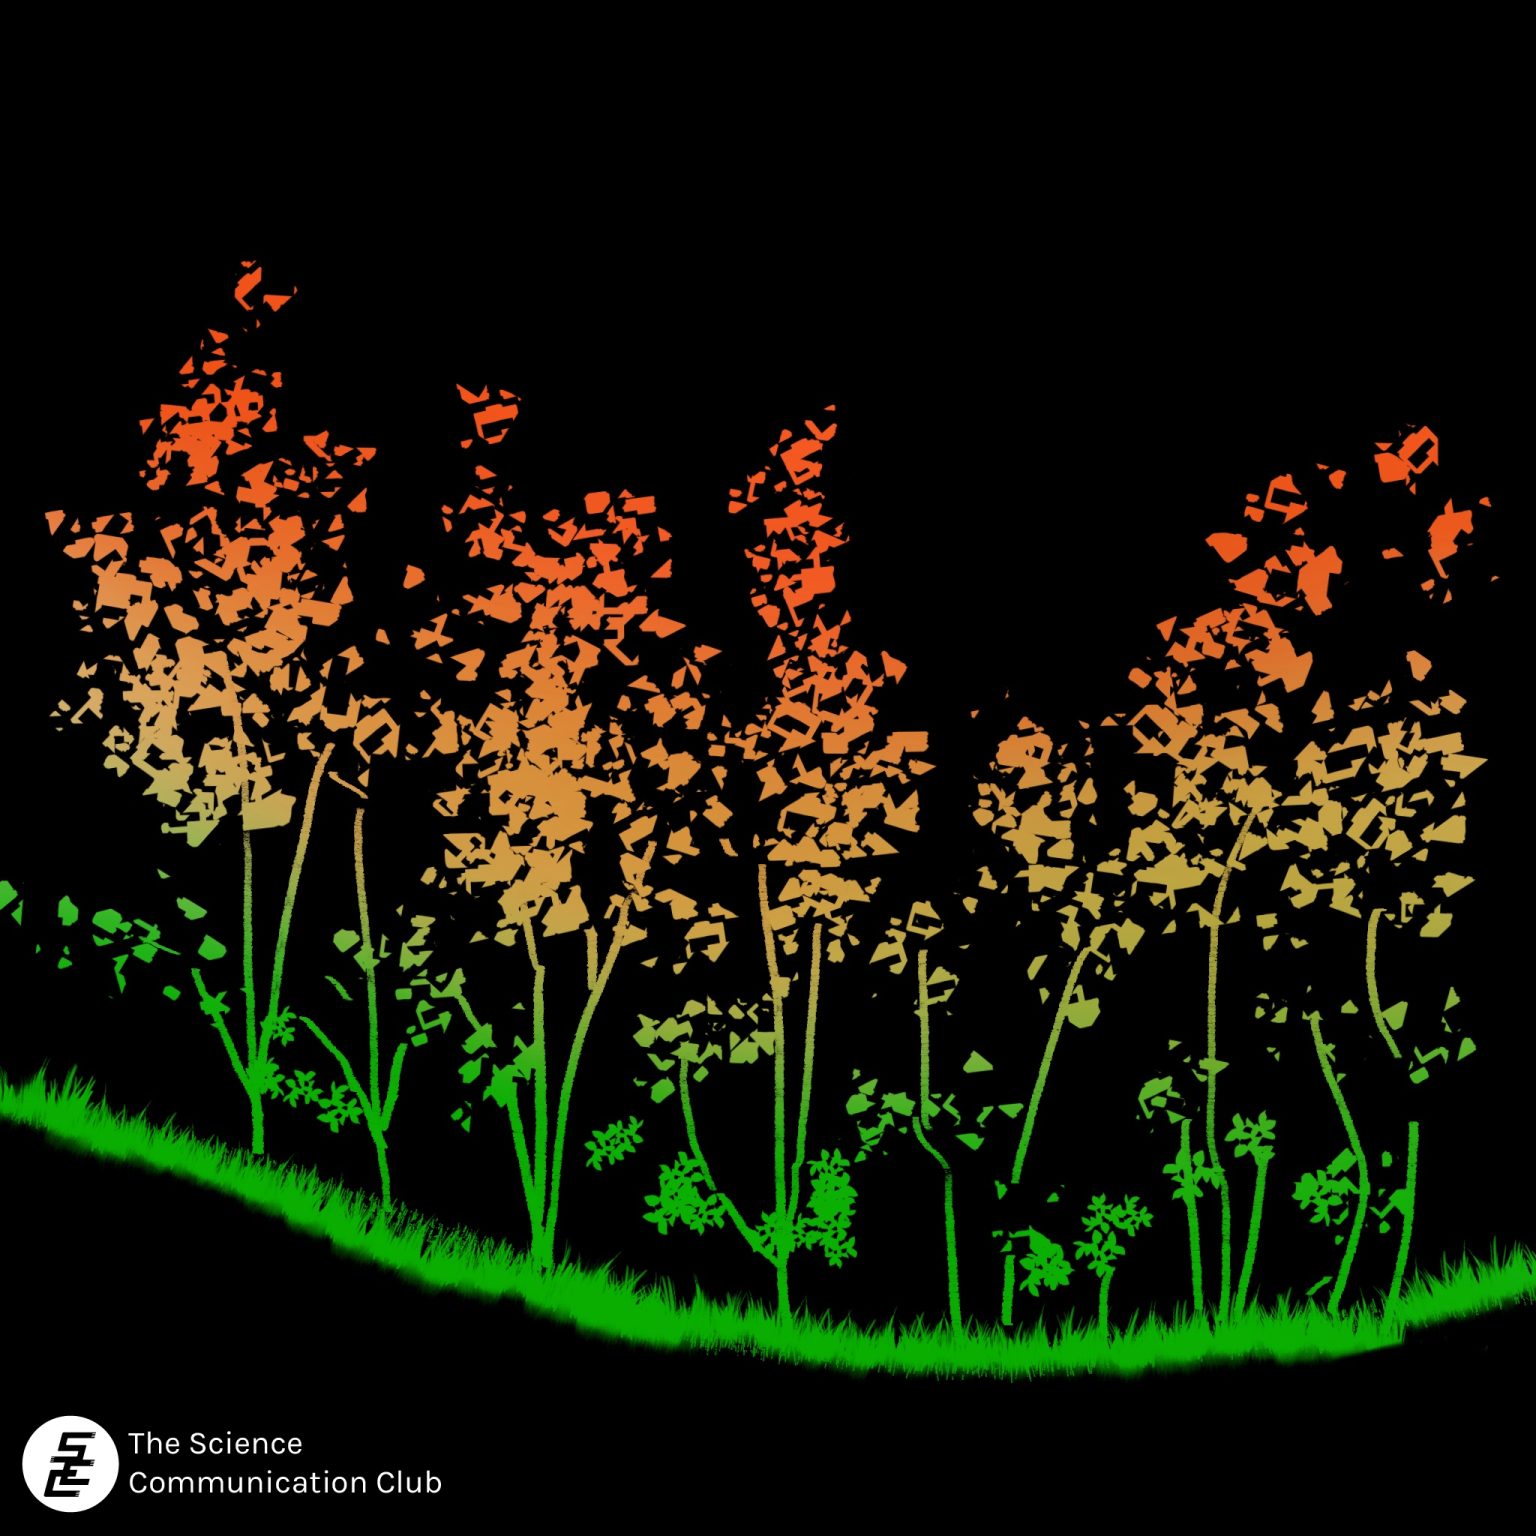 Image depicts LiDAR visualization of the Amazon rainforest. The image shows a cross-section of a tree line coloured in a gradient ranging from green to orange against a black background.